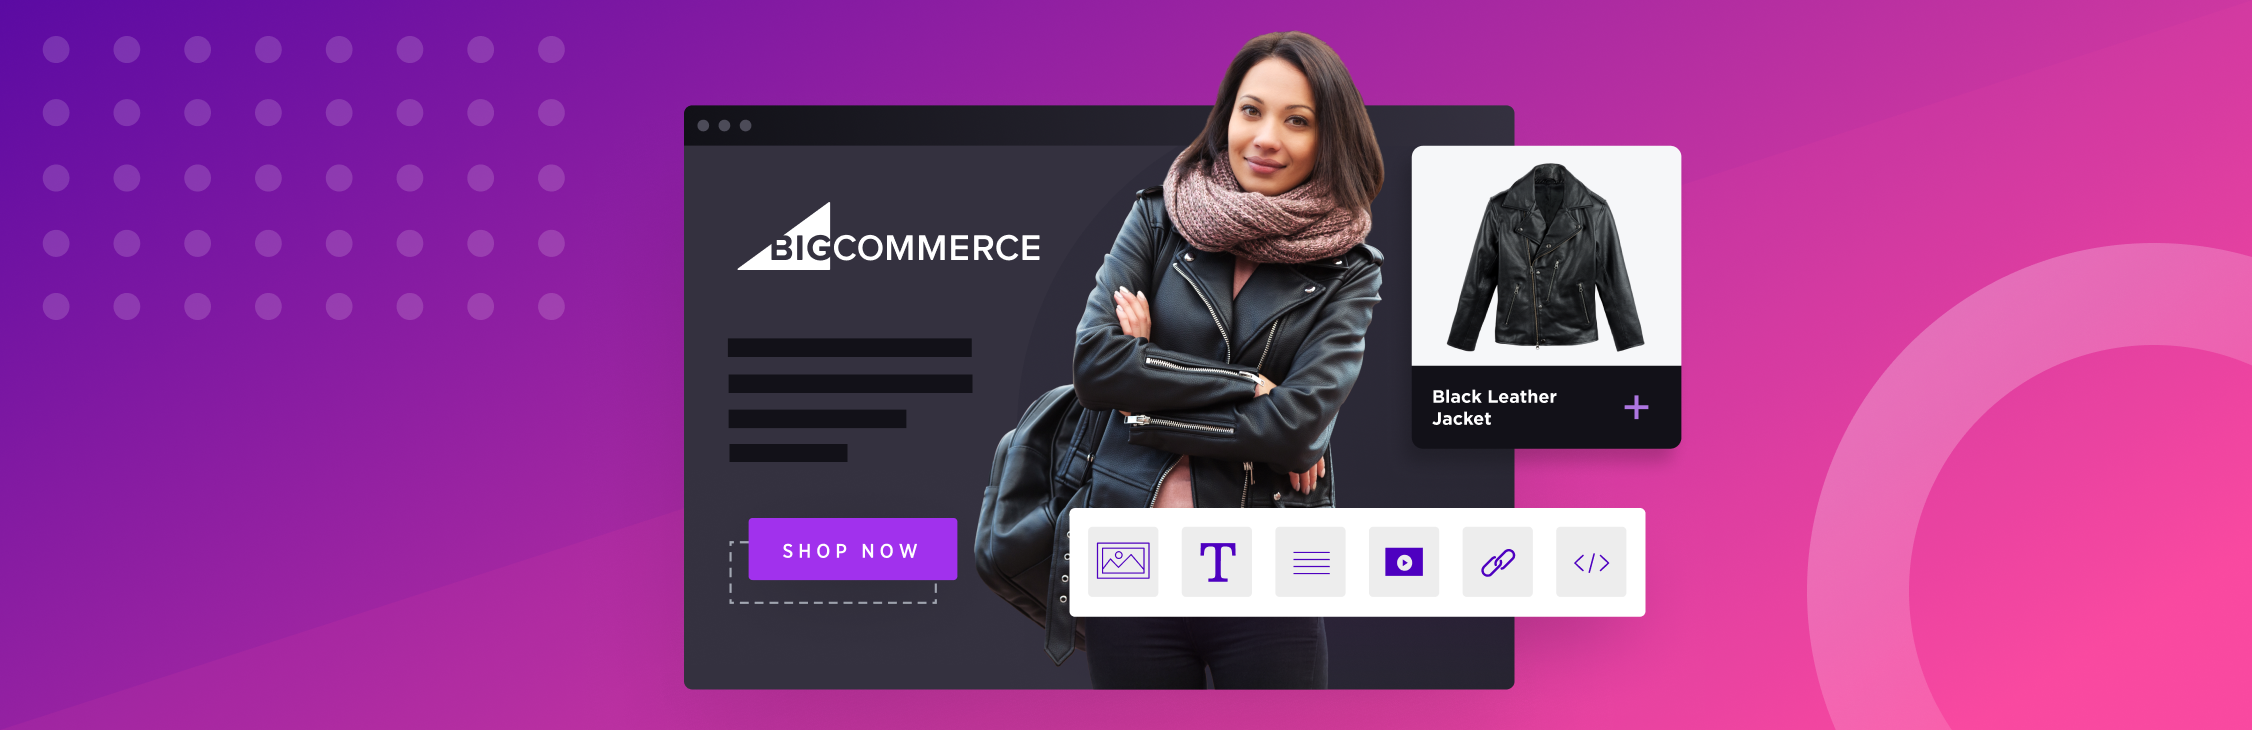 Article header sell online page builder bigcommerce